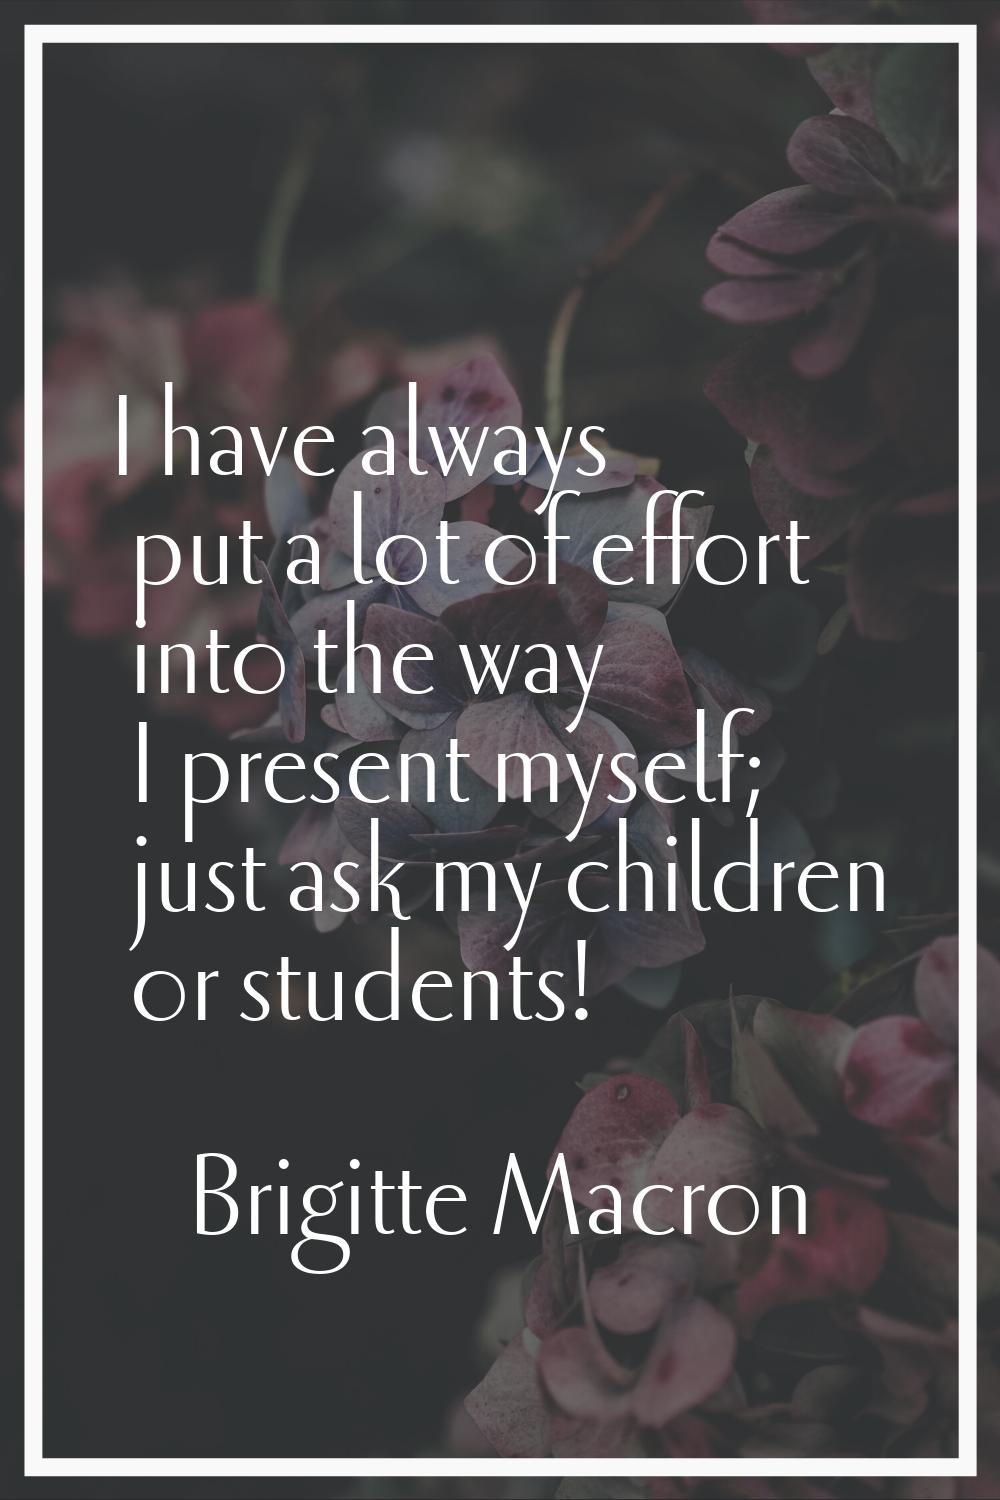 I have always put a lot of effort into the way I present myself; just ask my children or students!